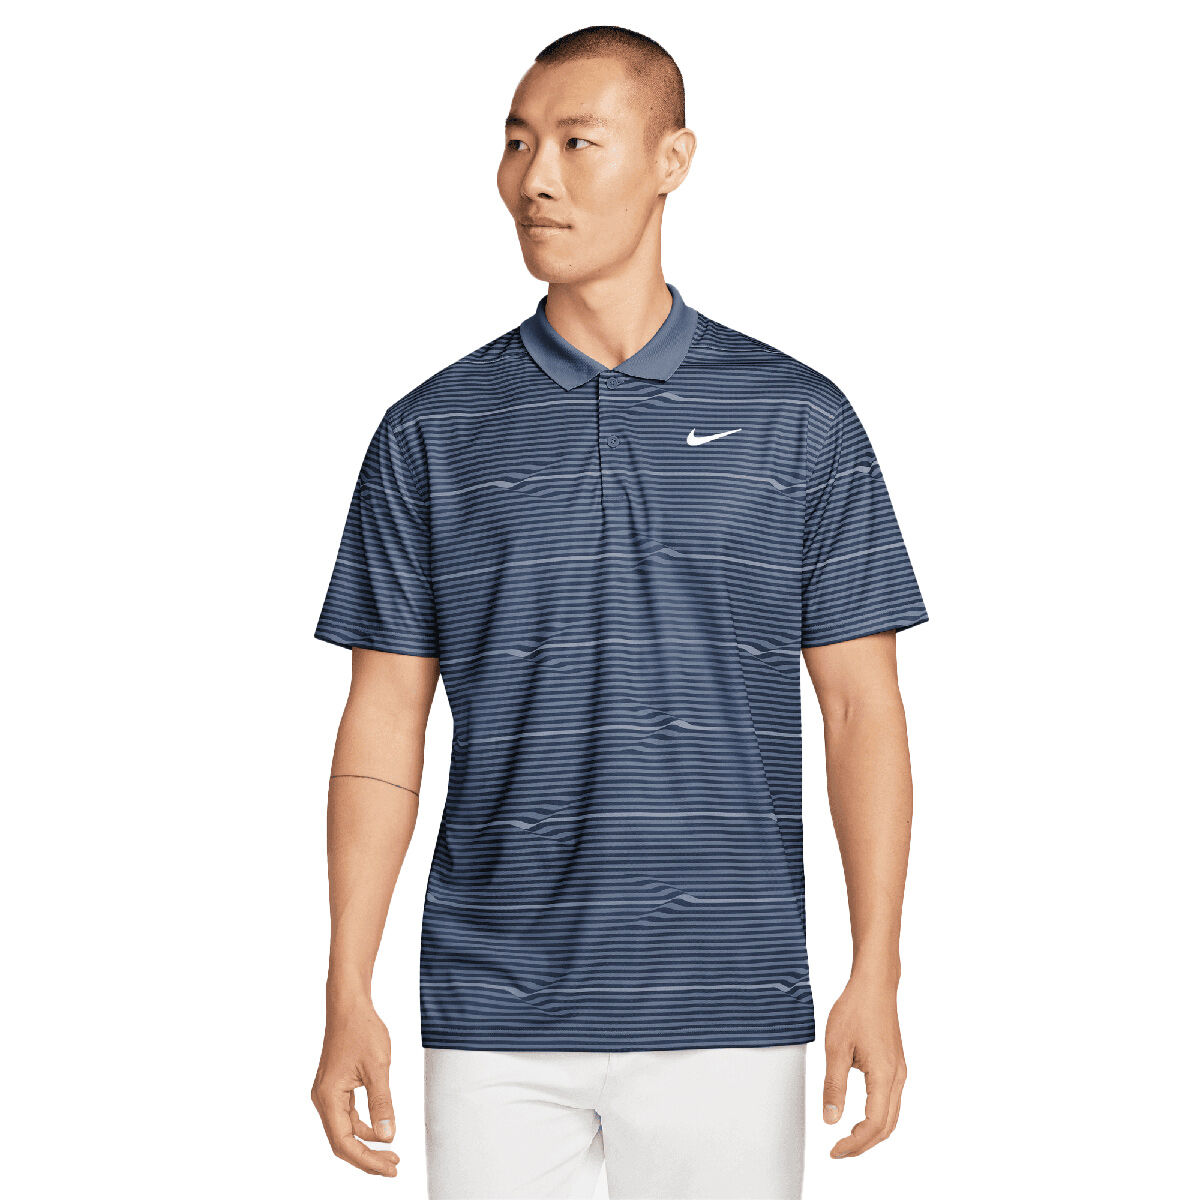 Nike Men’s Victory+ Ripple Golf Polo Shirt, Mens, Midnight navy/diffused blue/wh, Small | American Golf